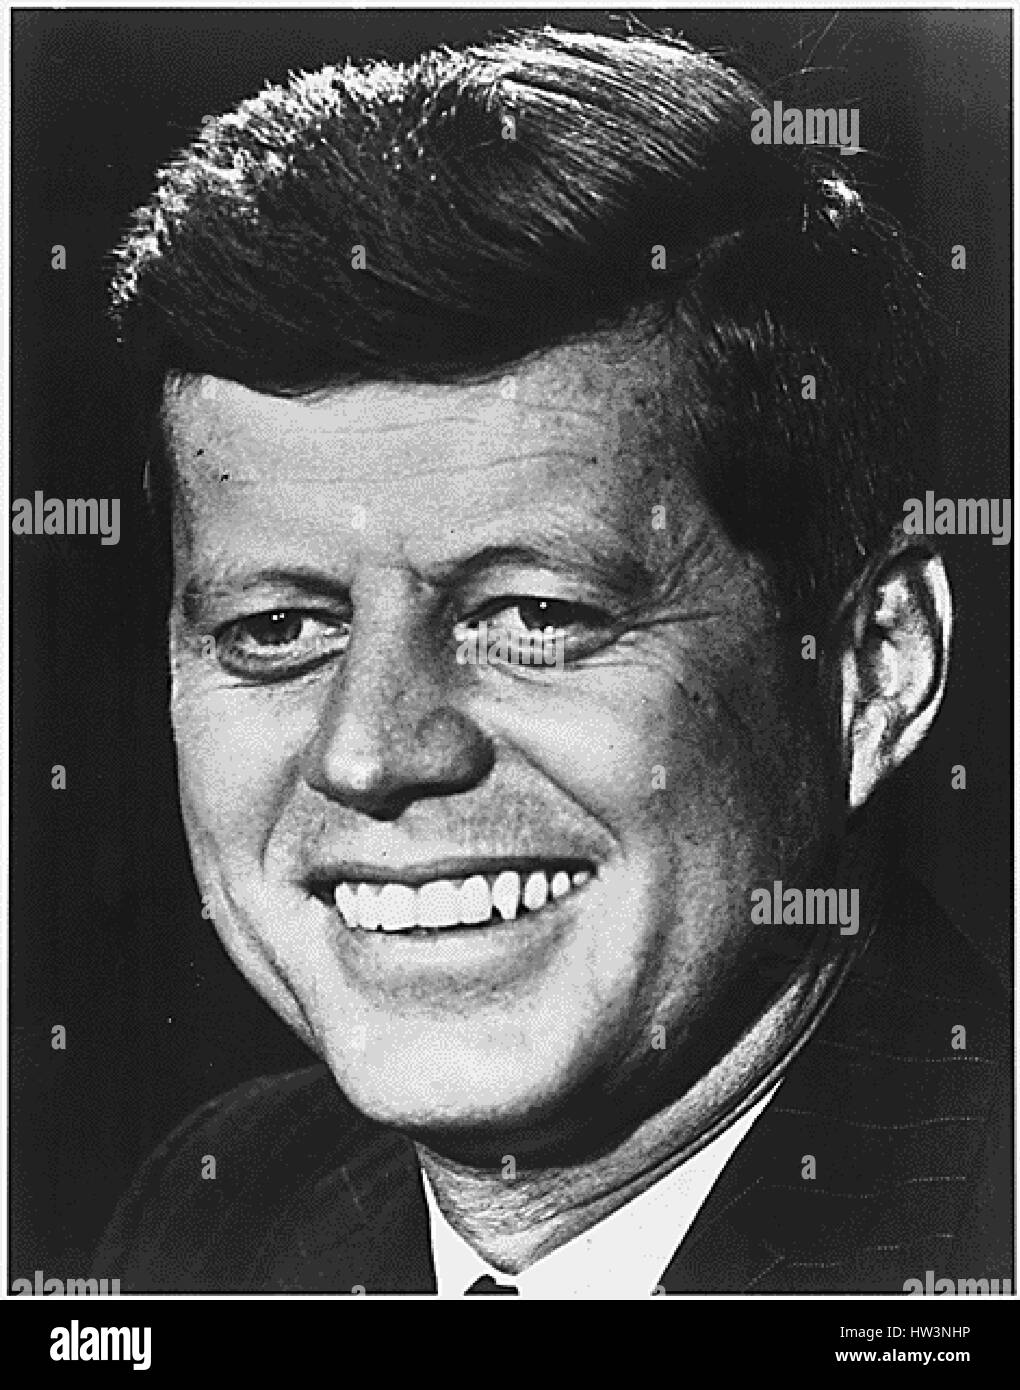 Undated head shot of John Fitzgerald Kennedy 35th President of the United States Credit: White House via CNP /MediaPunch Stock Photo